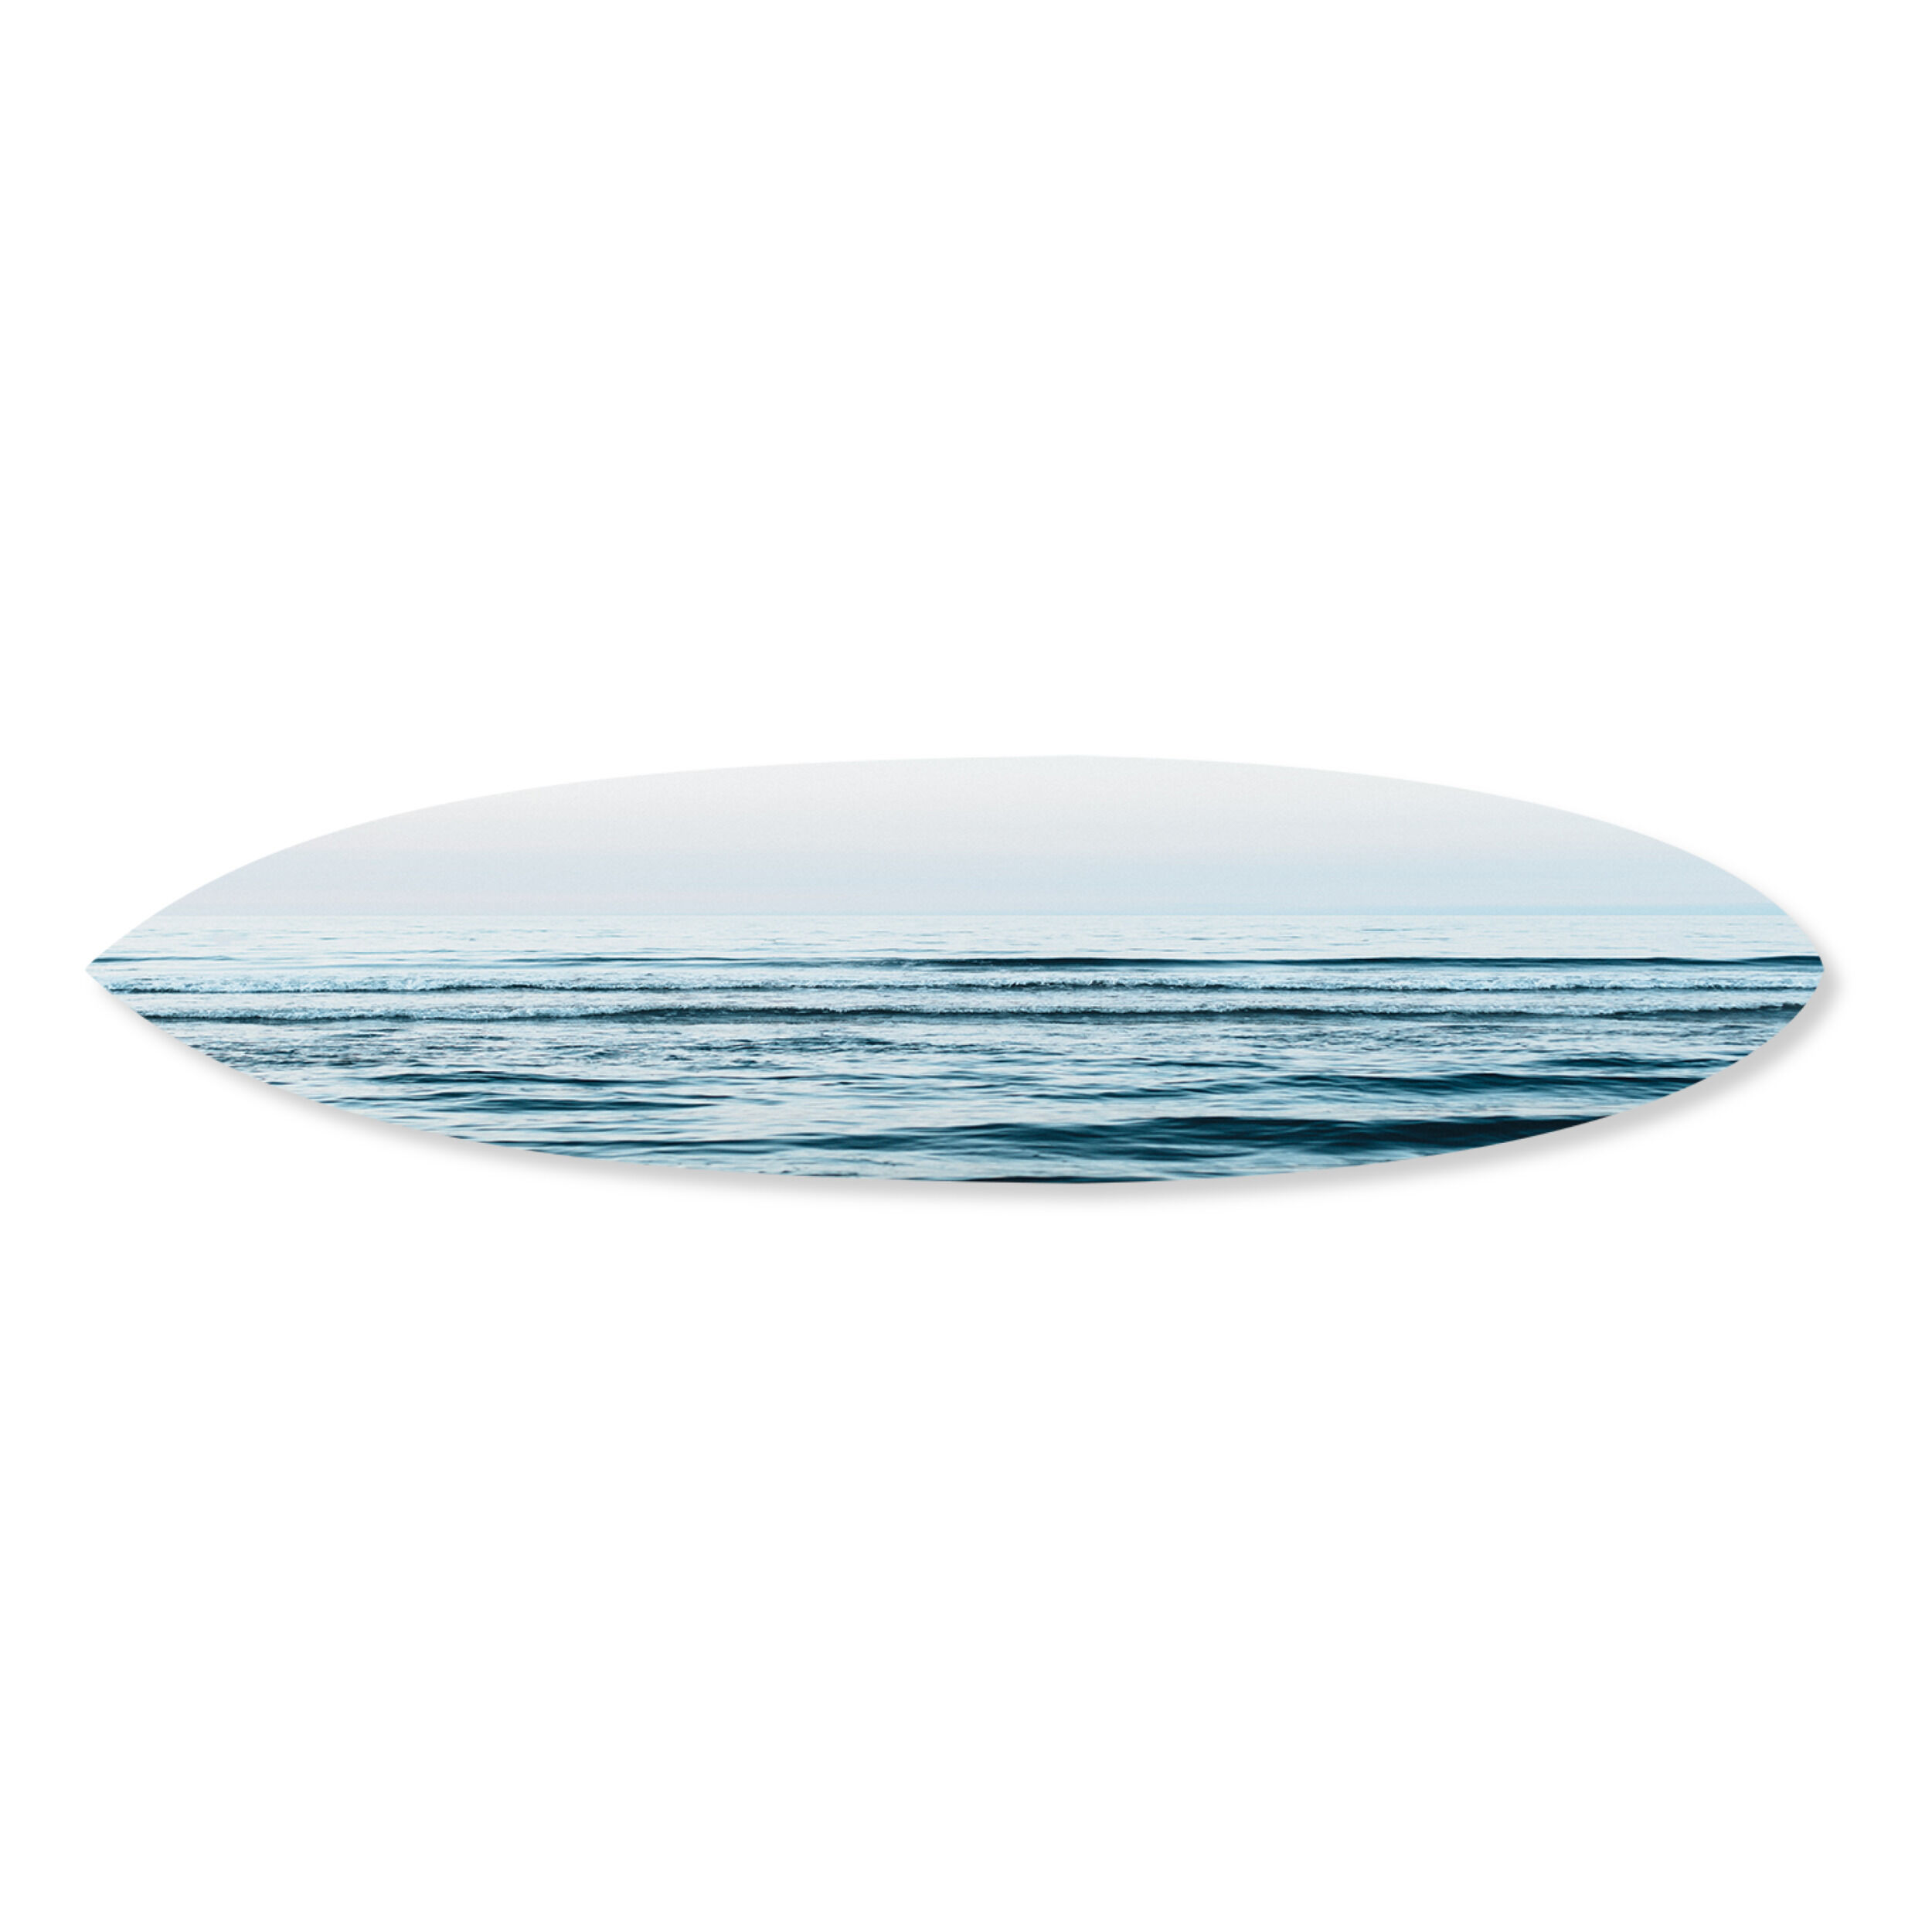 Sea Side Horizon Surfboard | Wall Art by Oliver Gal